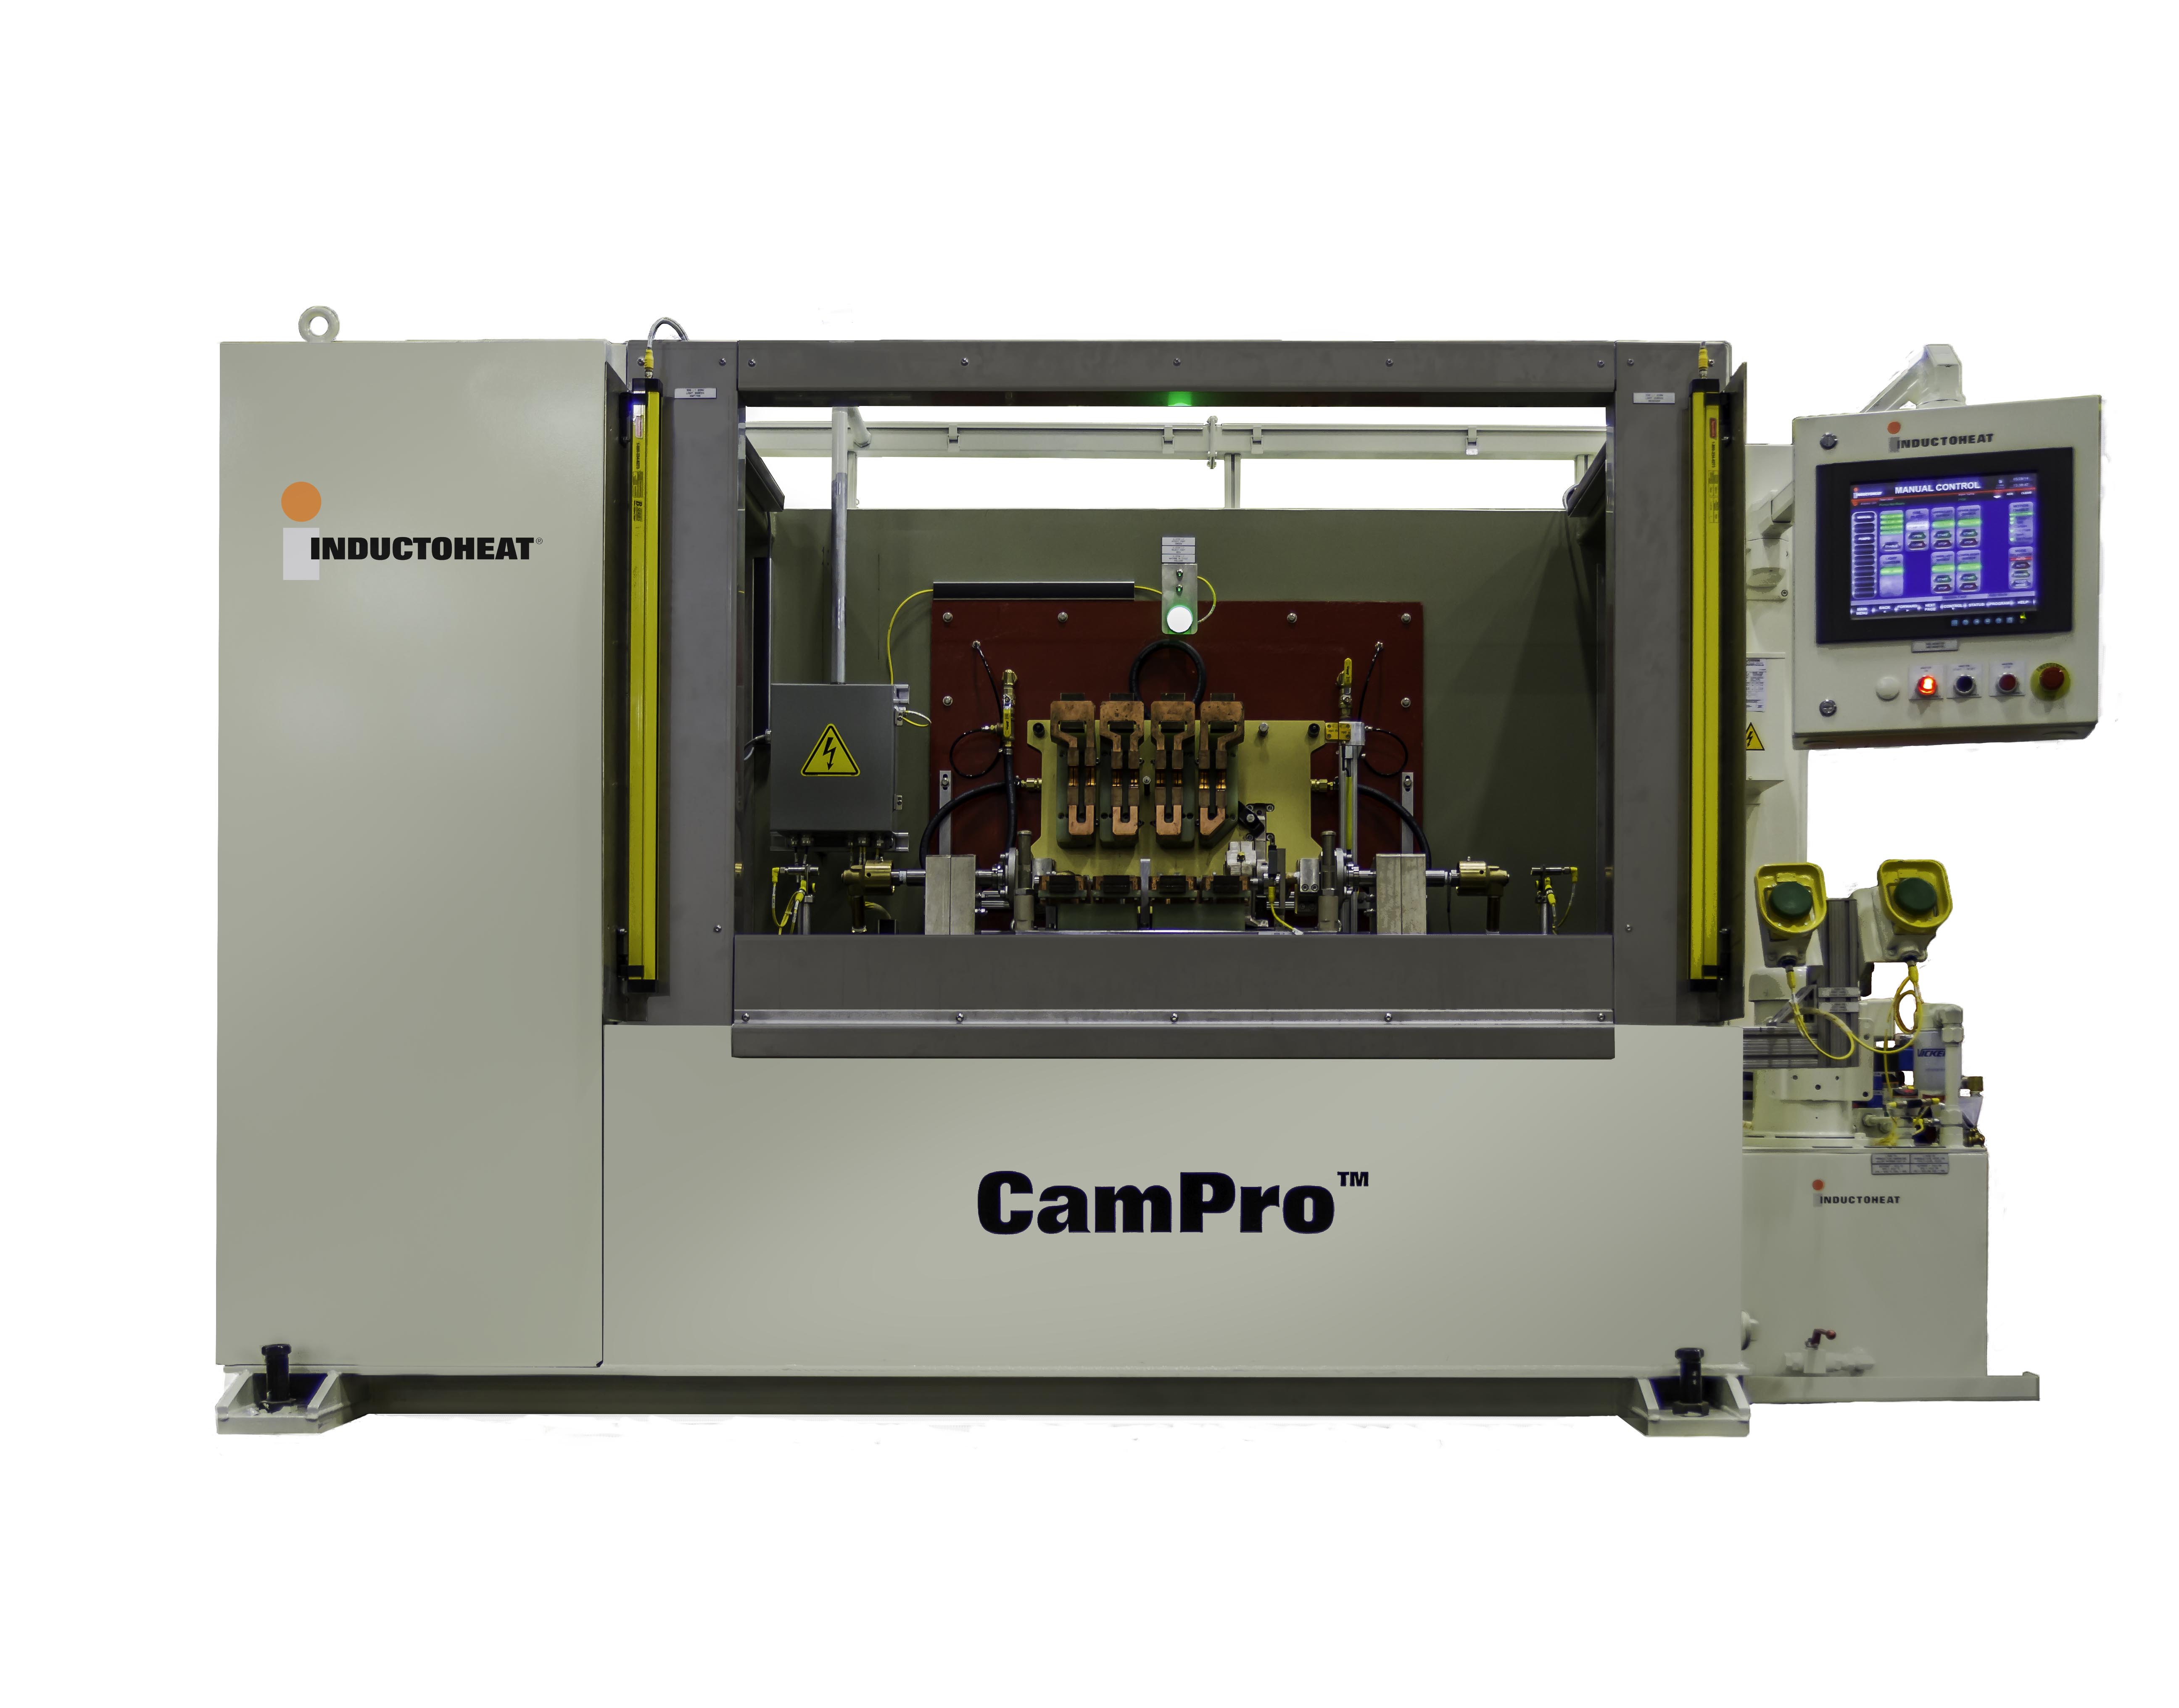 Inductoheat CamPro™ Stationary Induction Heat Treating For Camshafts